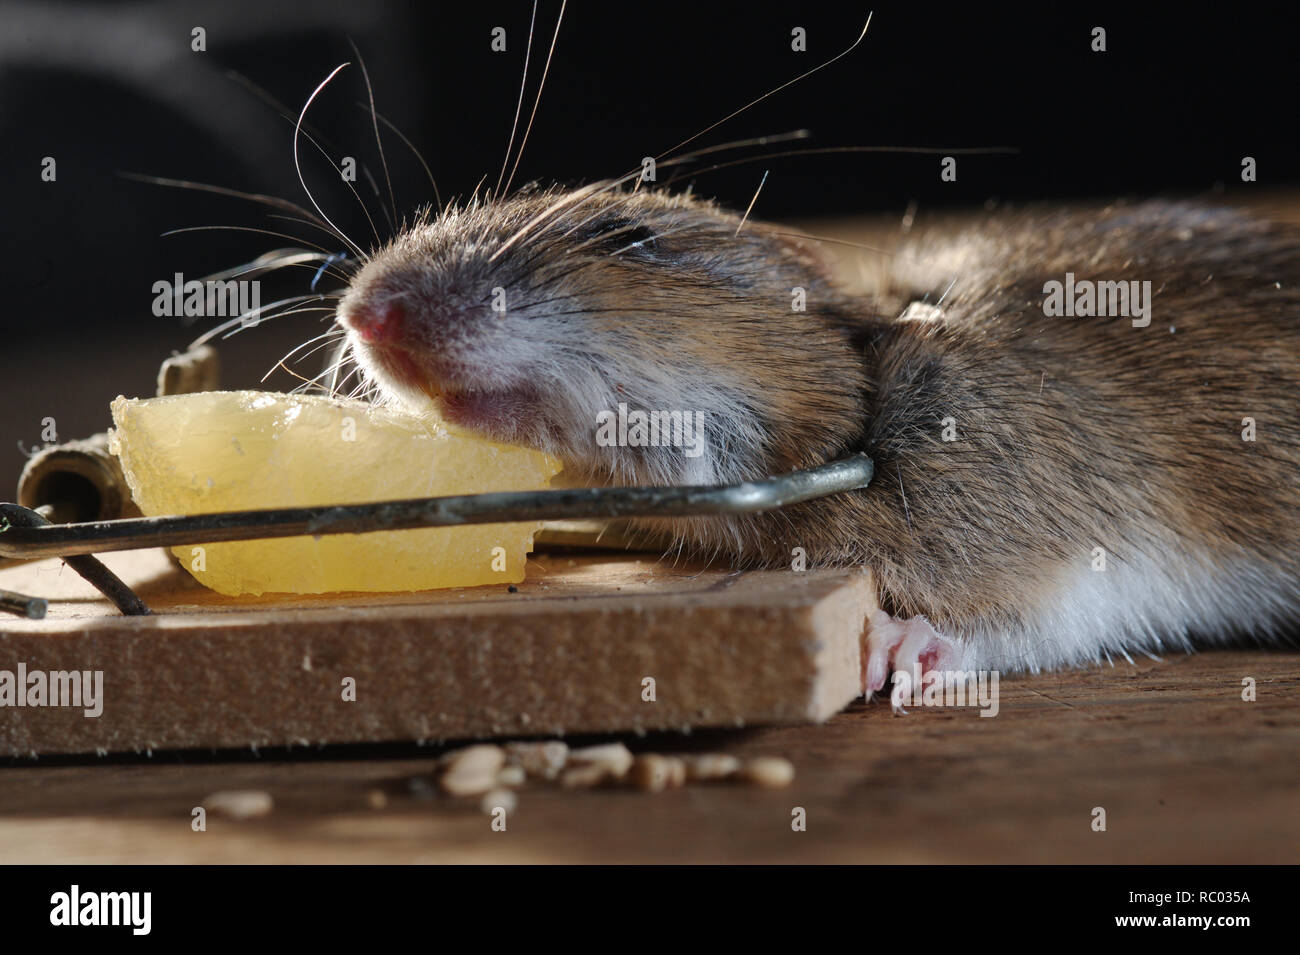 Maus in der Mausefalle gefangen | mouse caught in a mouse trap Stock Photo  - Alamy